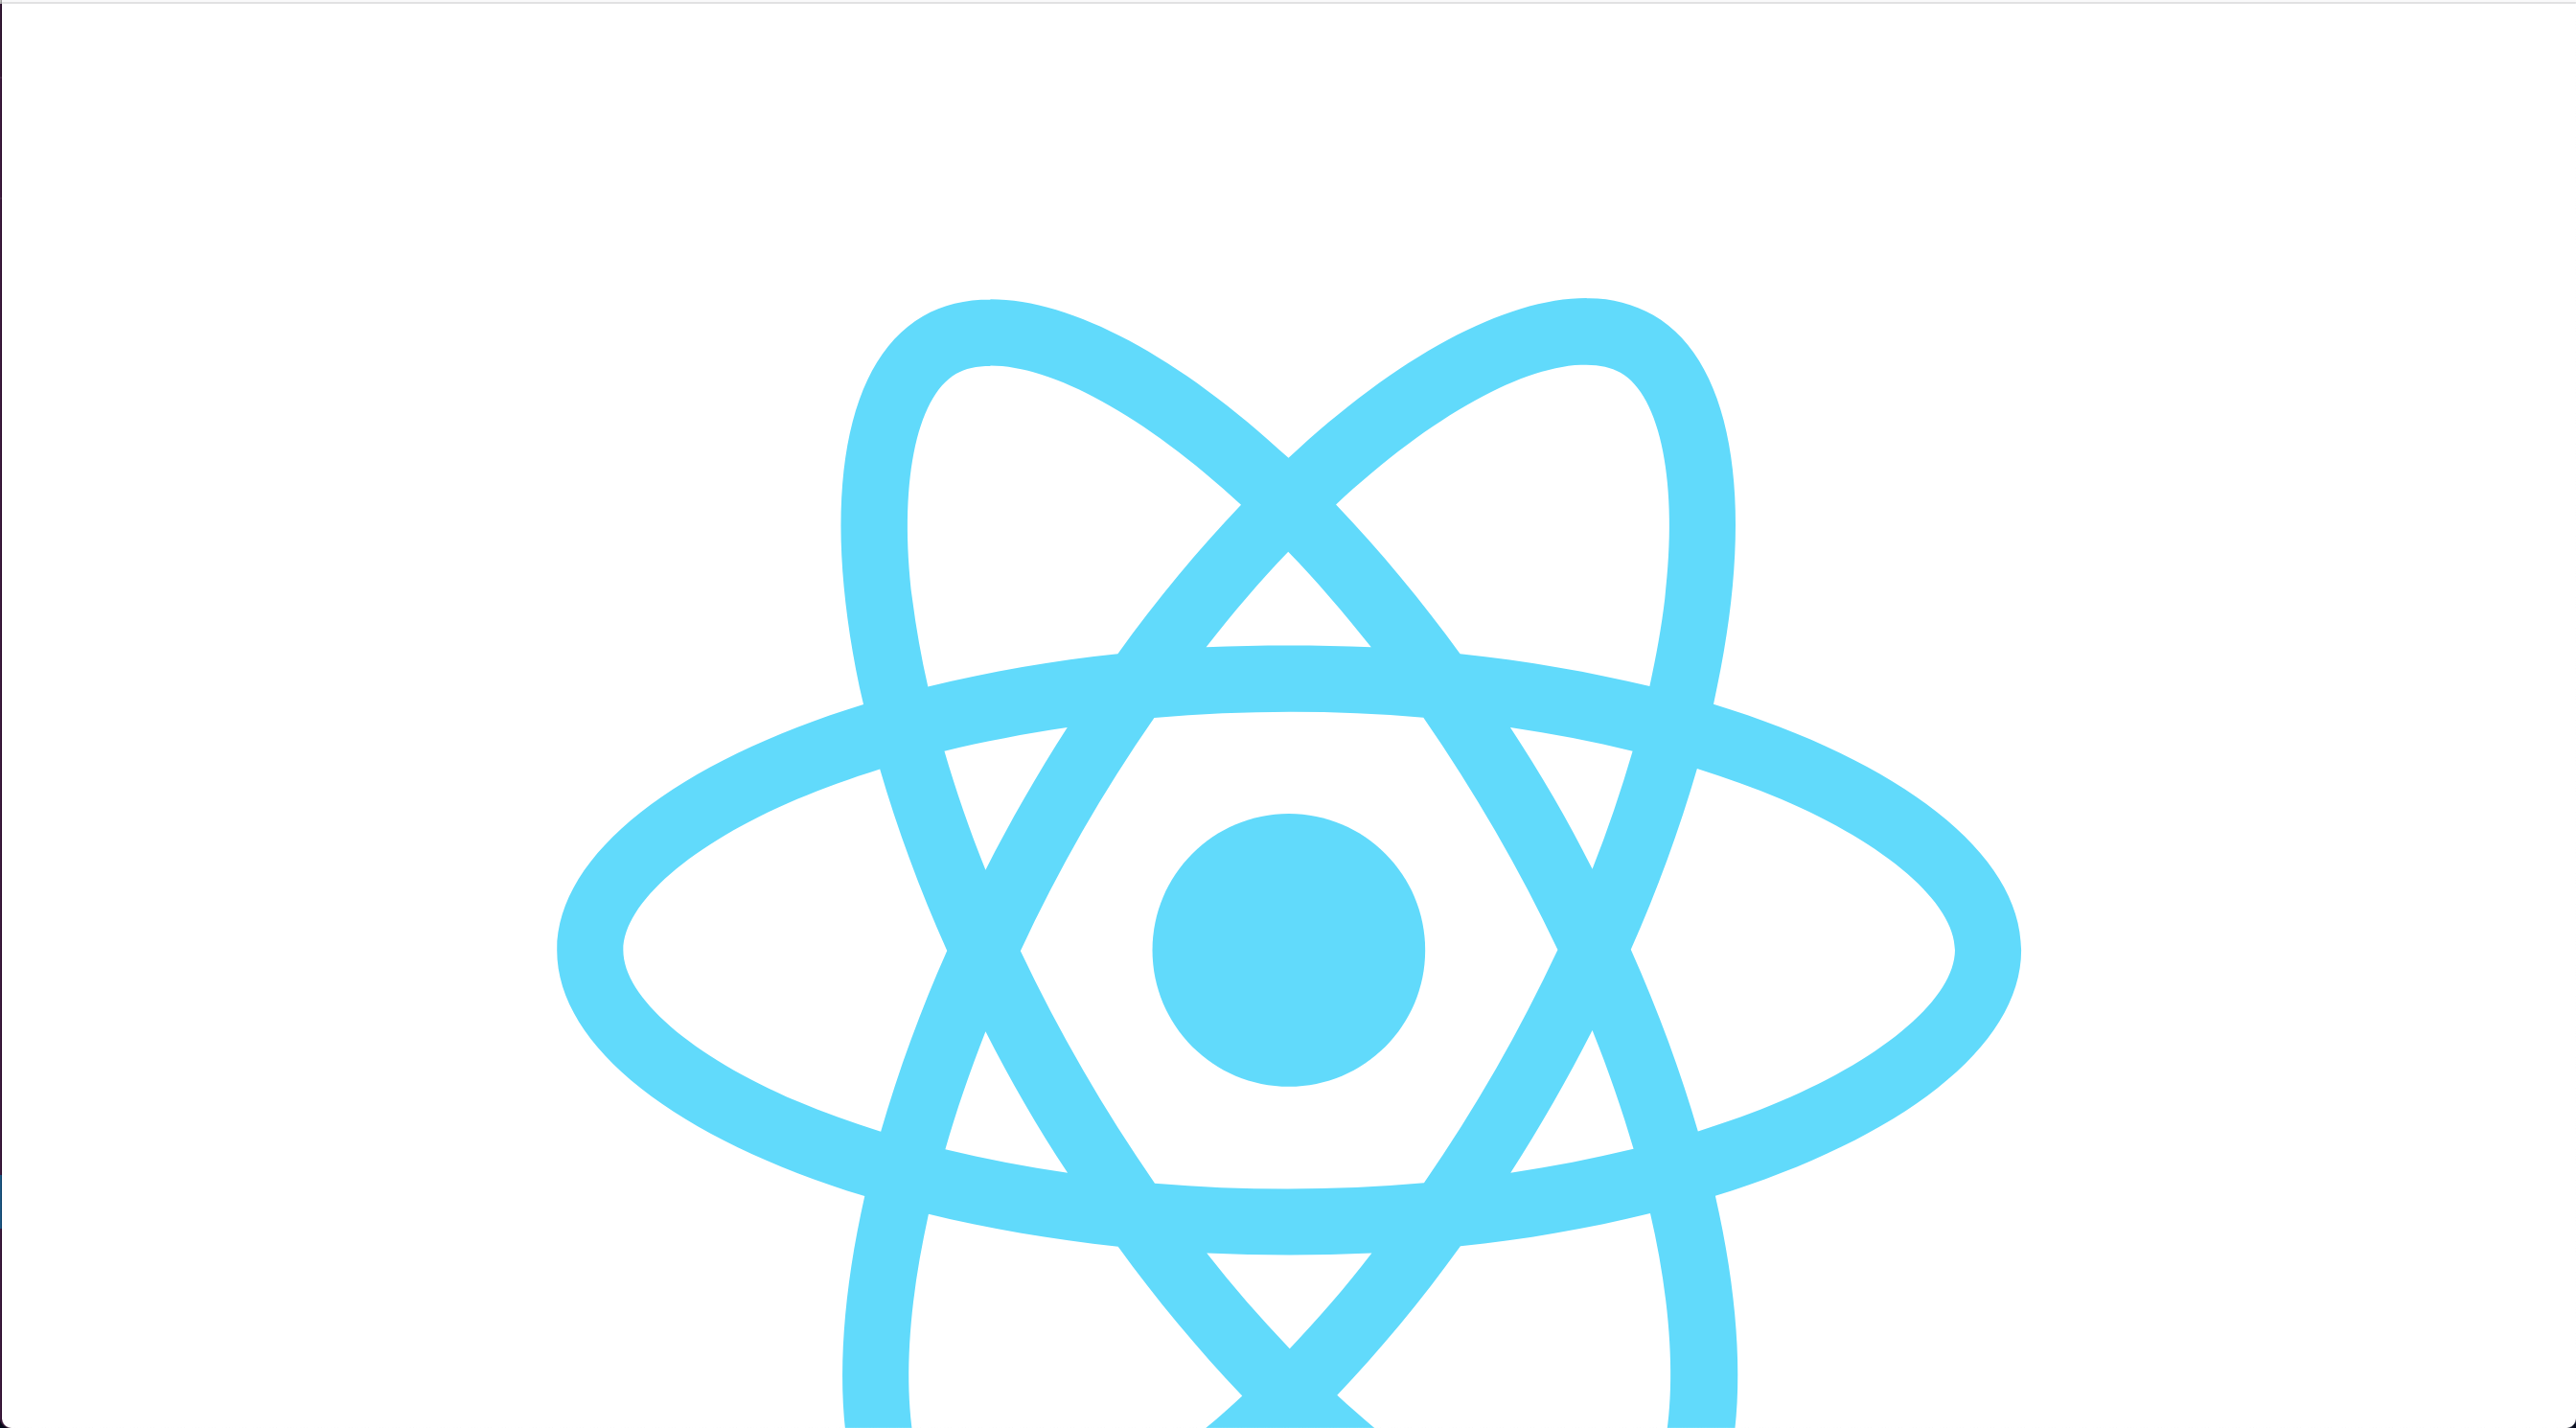 the React logo (a blue atom) is now at the top of the page